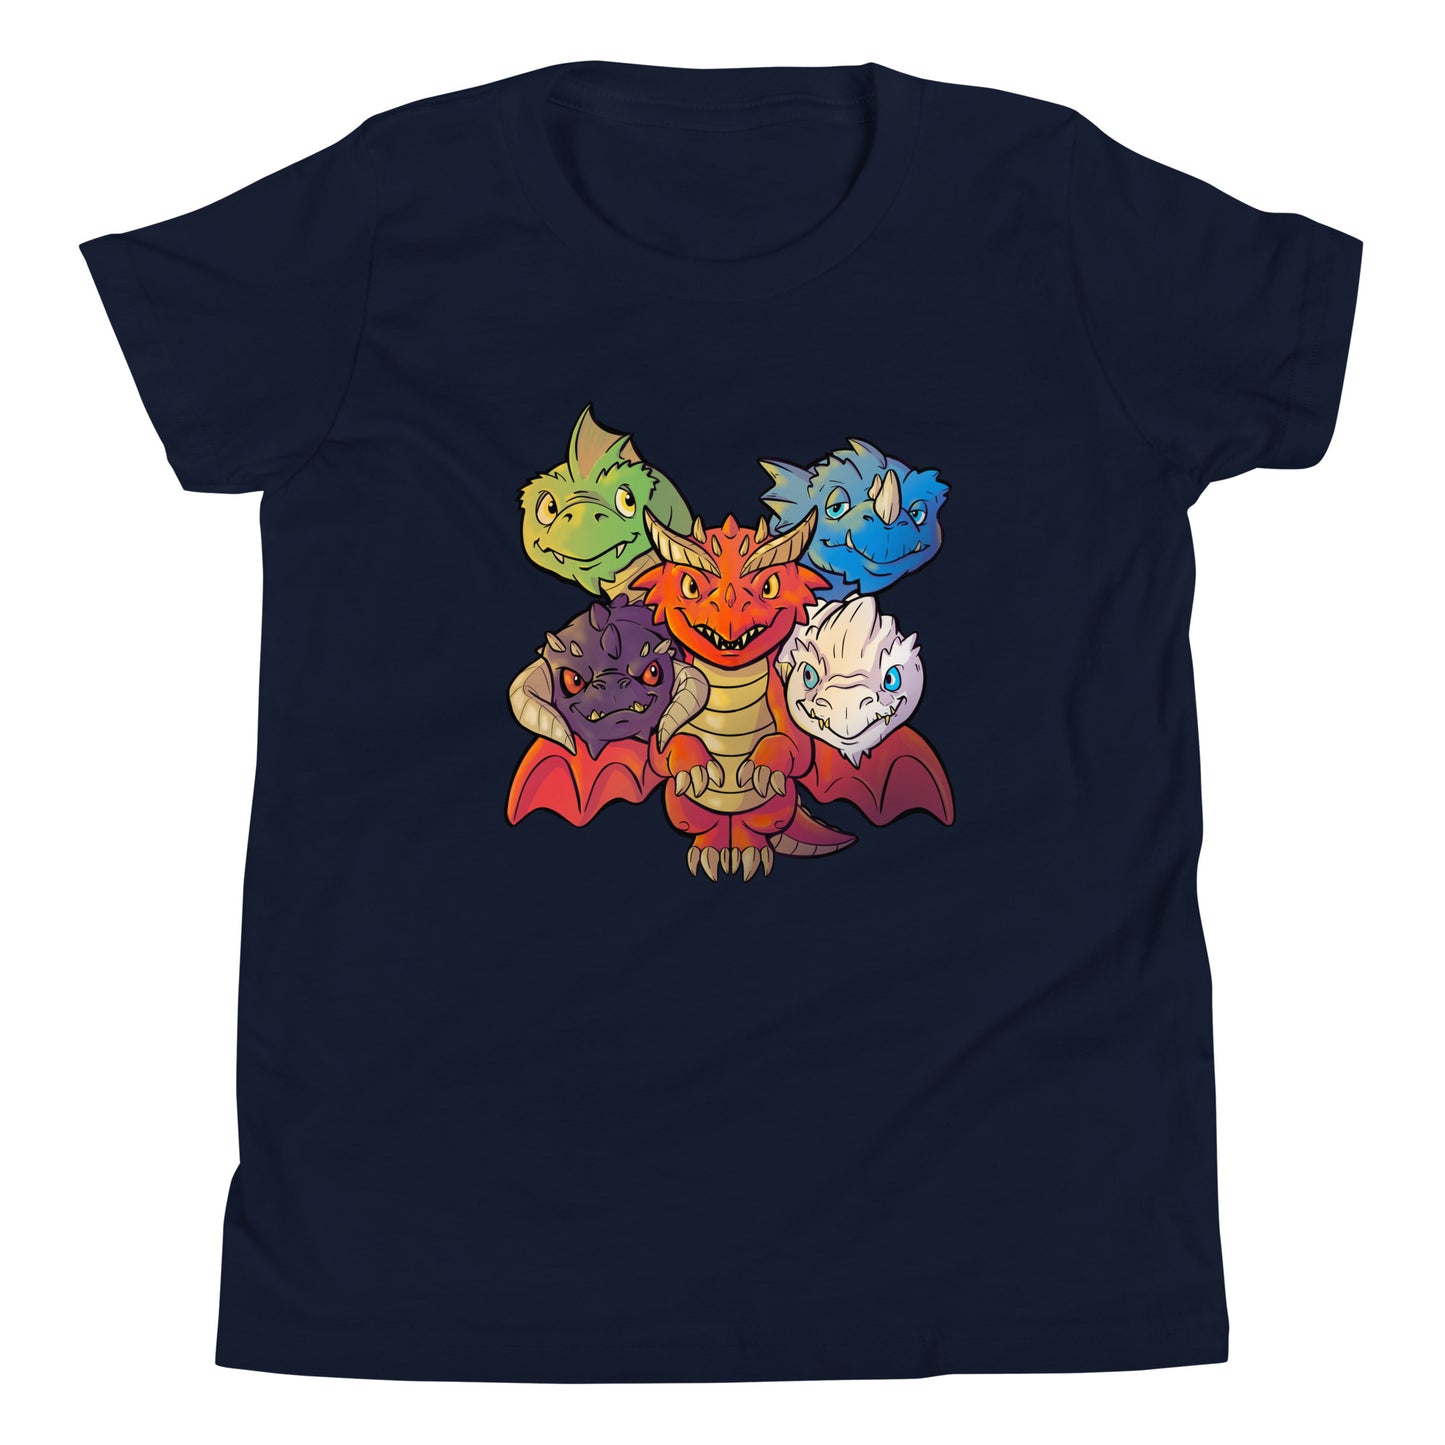 Little Queen of Dragons Youth Short Sleeve T-Shirt  Level 1 Gamers Navy S 